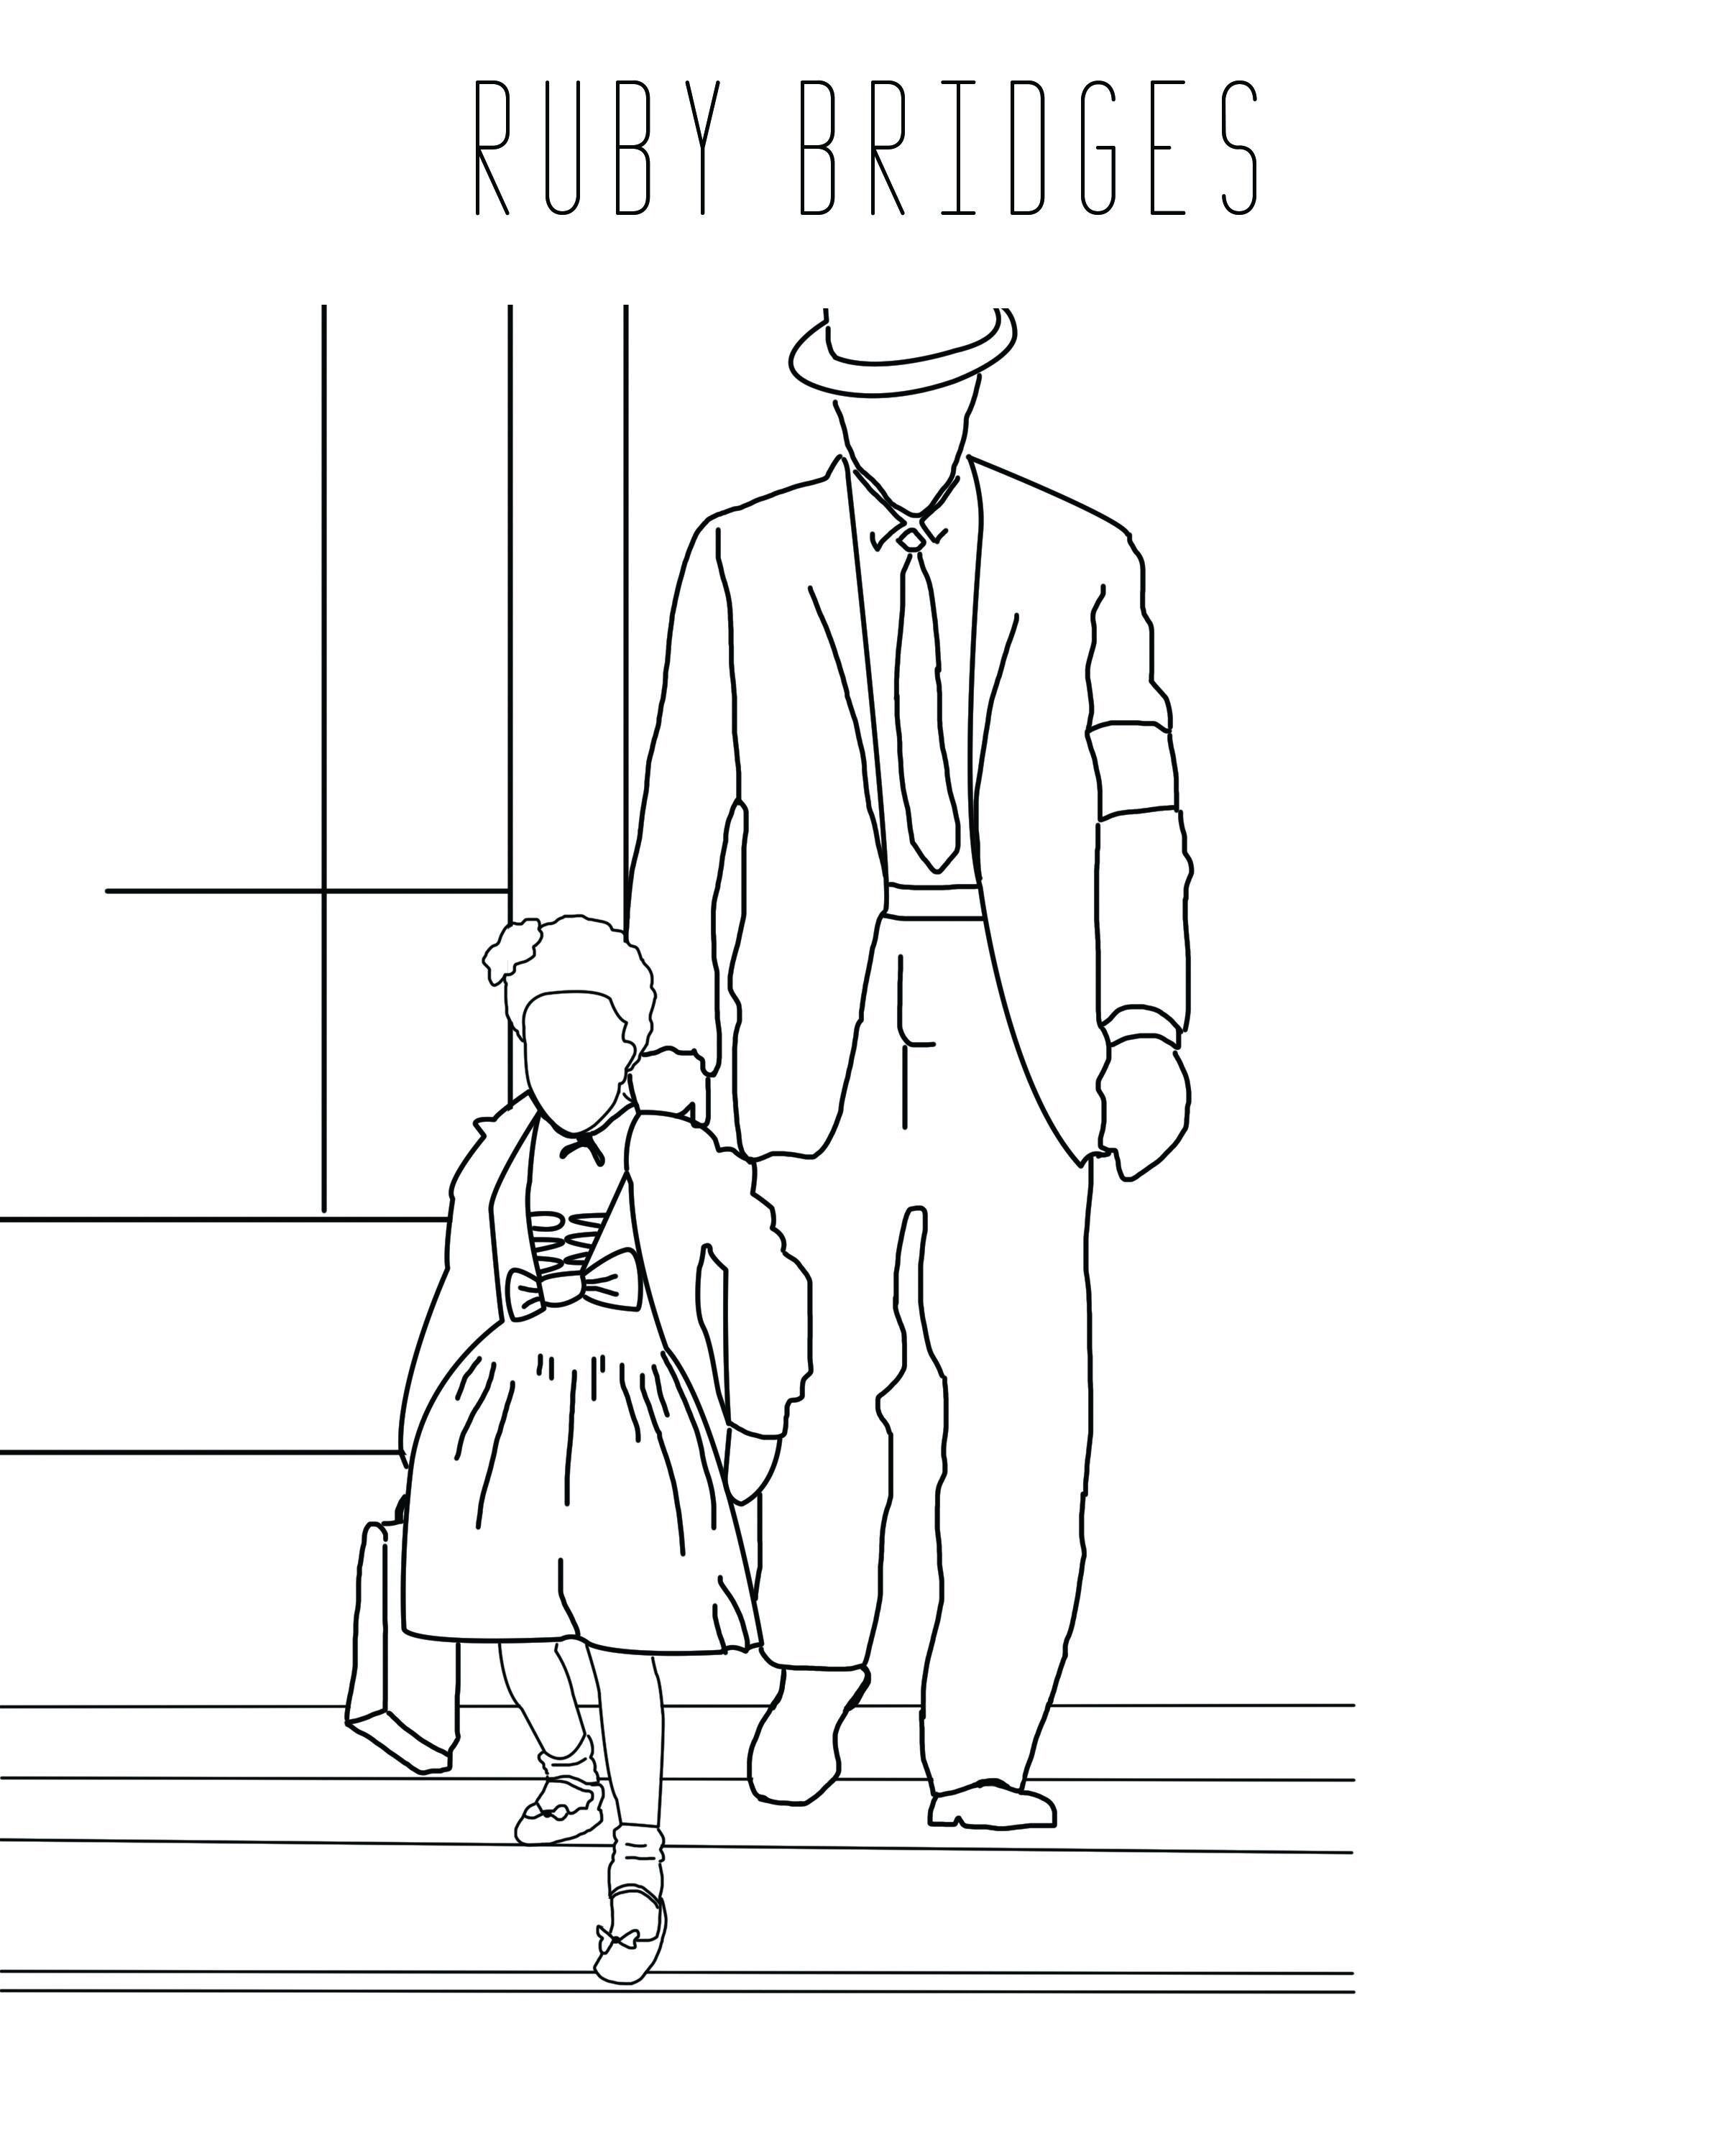 Black history month ruby bridges coloring page â doulas of capitol hill